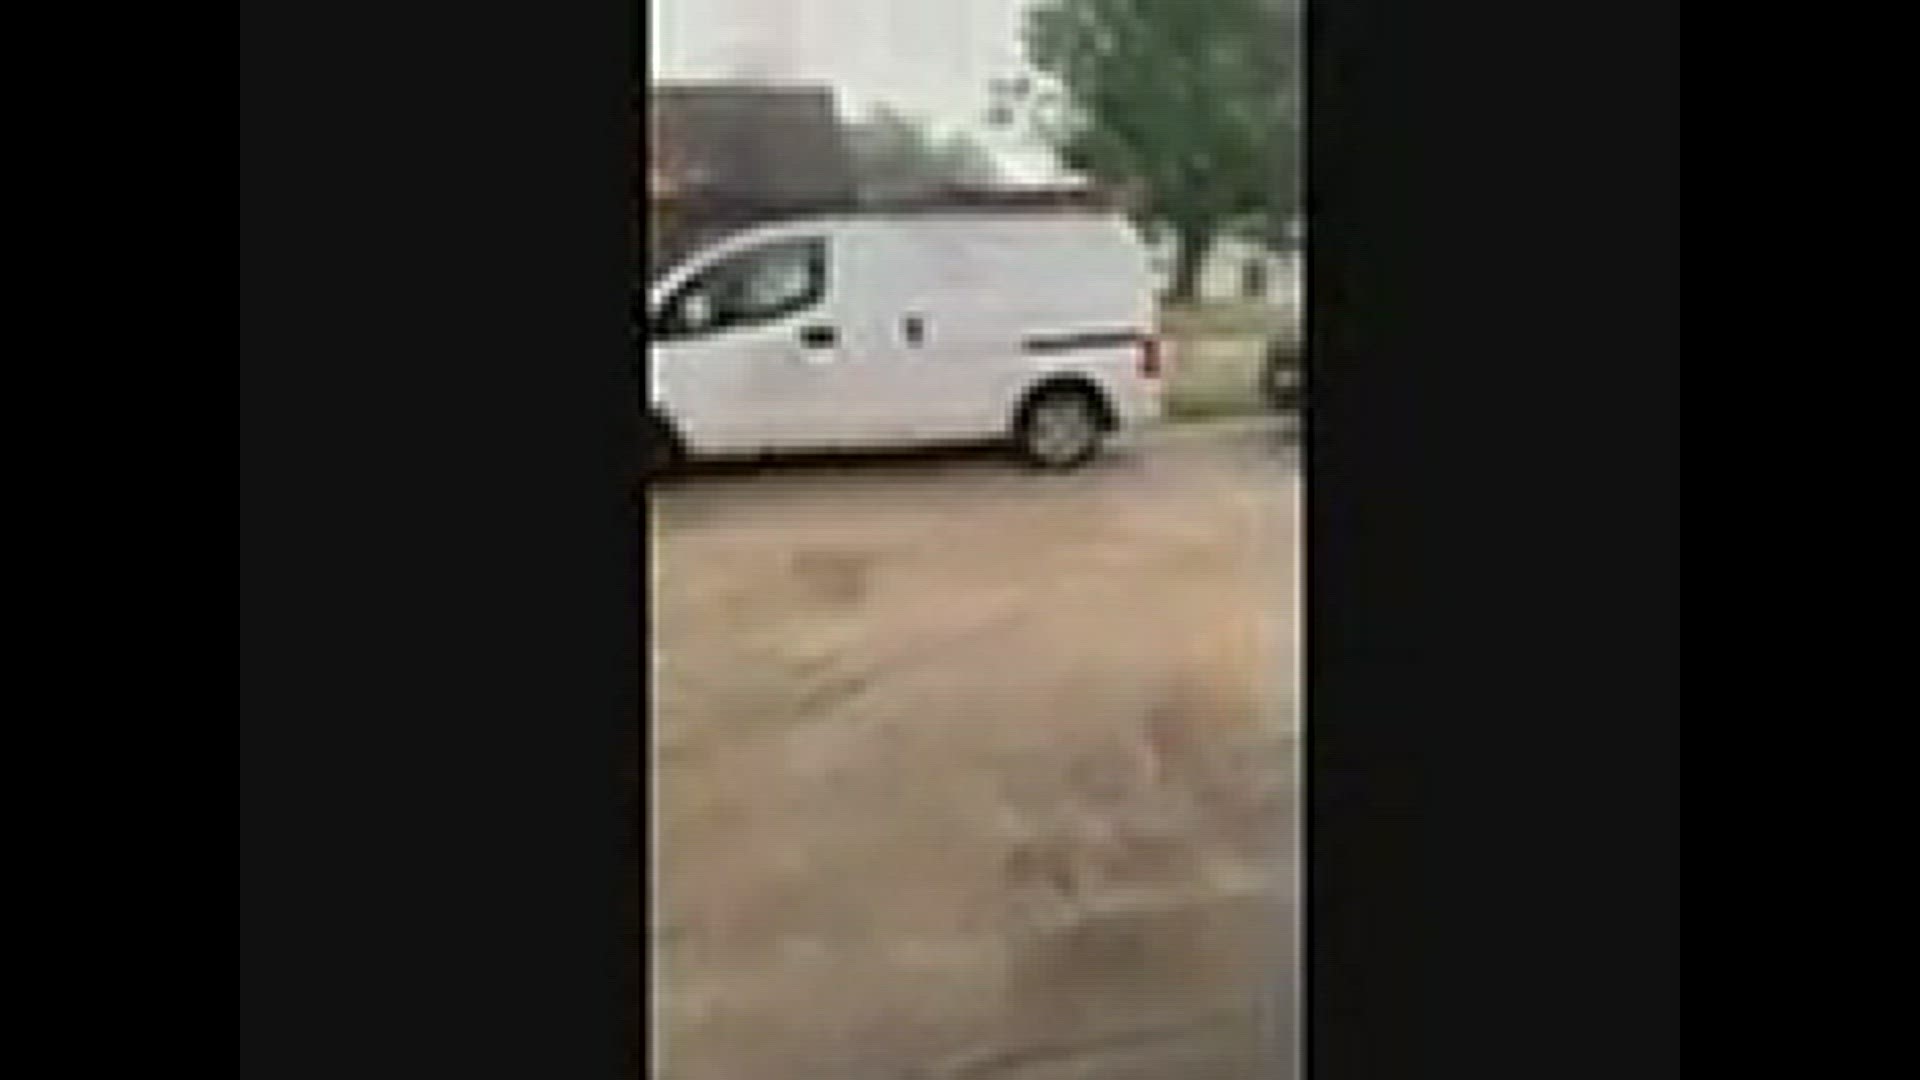 One Central Texan films hail and heavy rain from their driveway
Credit: KCEN Viewer